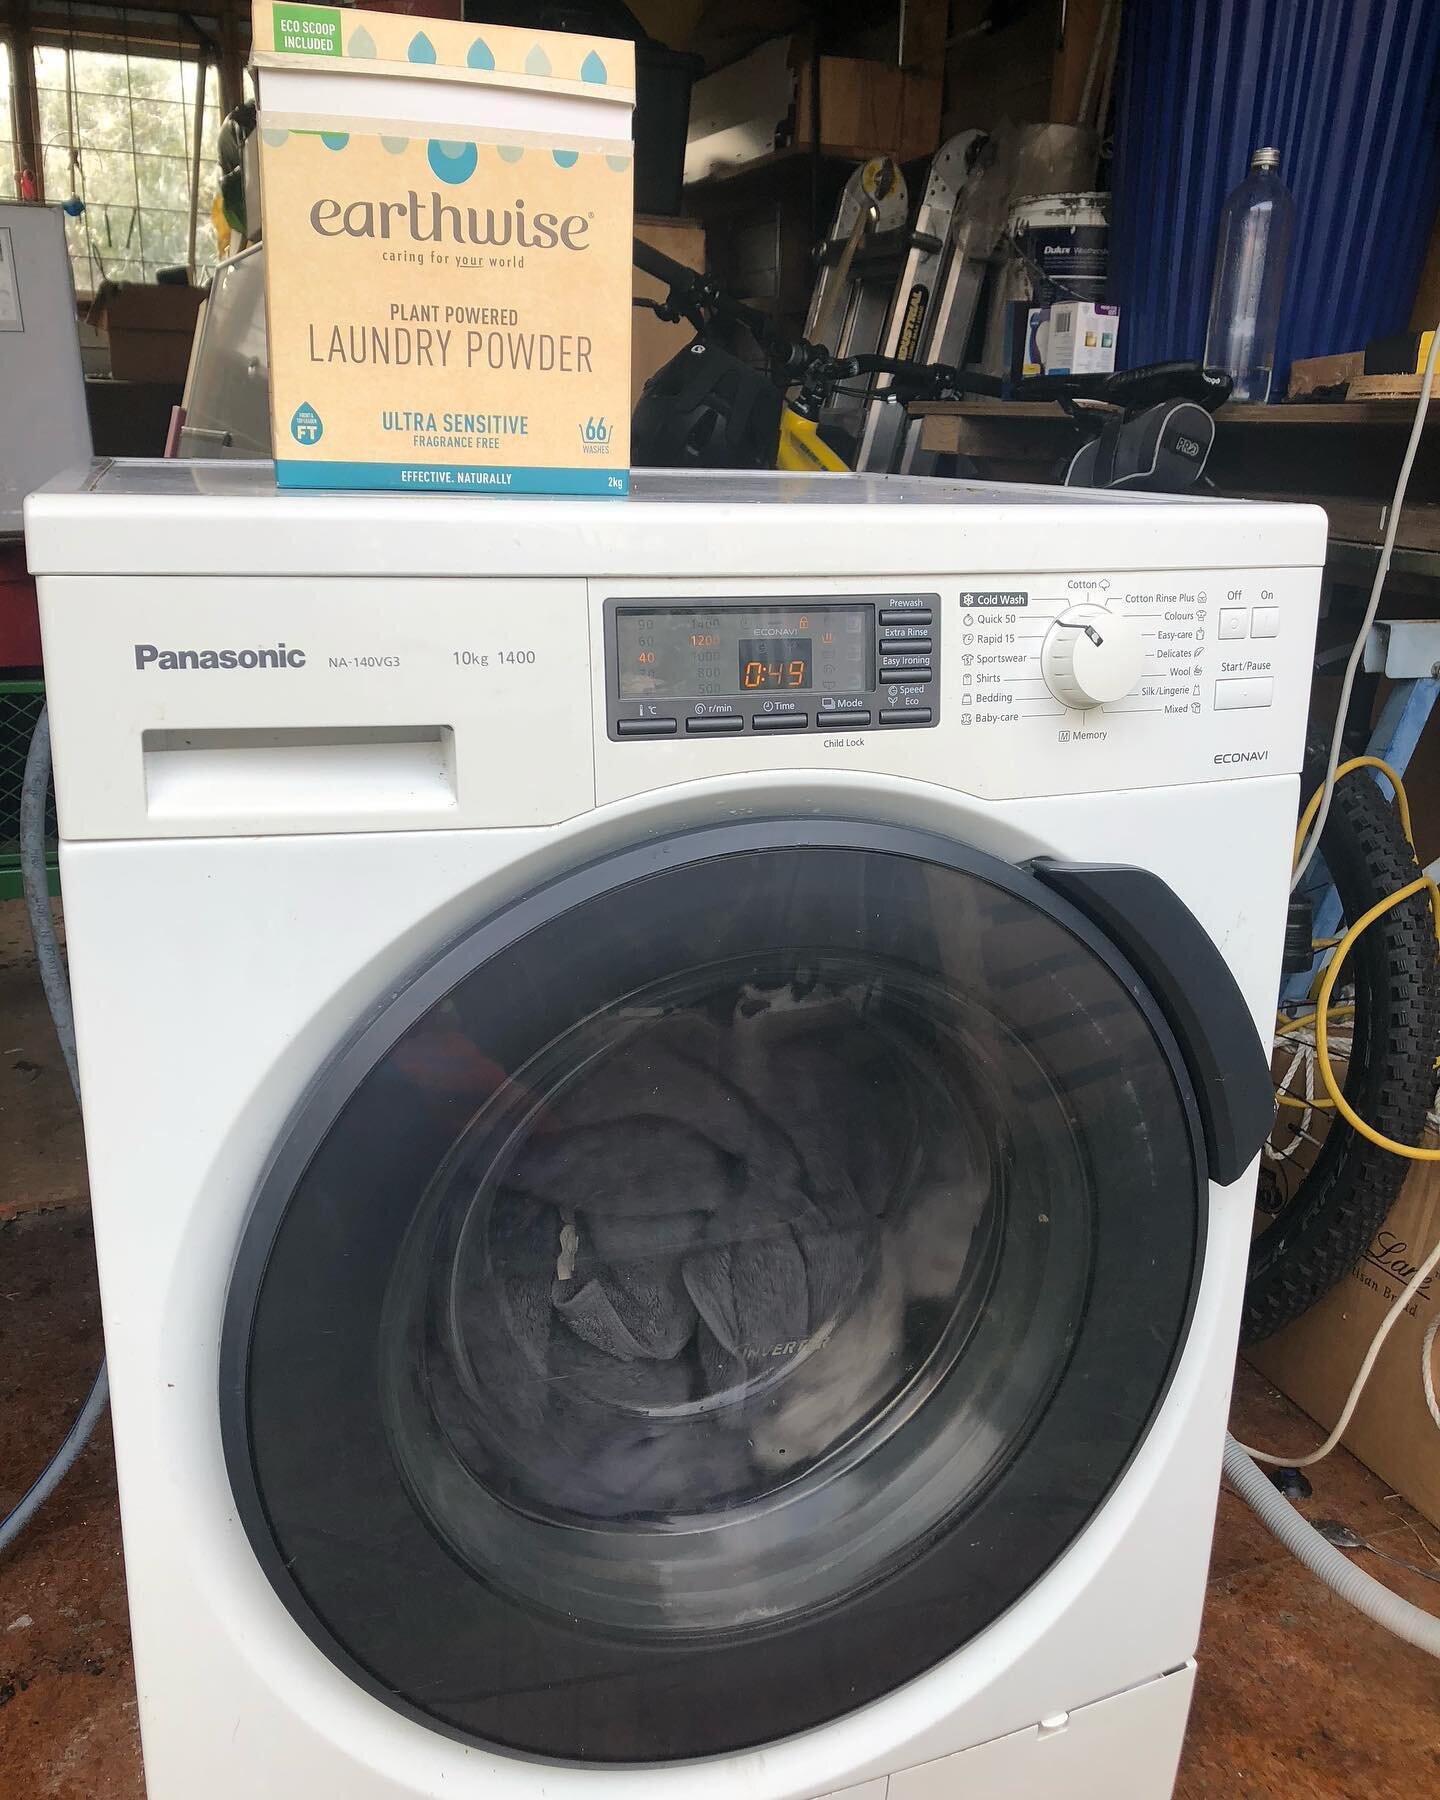 Starting to return to the commodified world with a working washing machine, thanks to a neighbour deciding to replace it even when in good working order. 

It&rsquo;s been a month or so without this resource, and it&rsquo;s been impacting life admin.